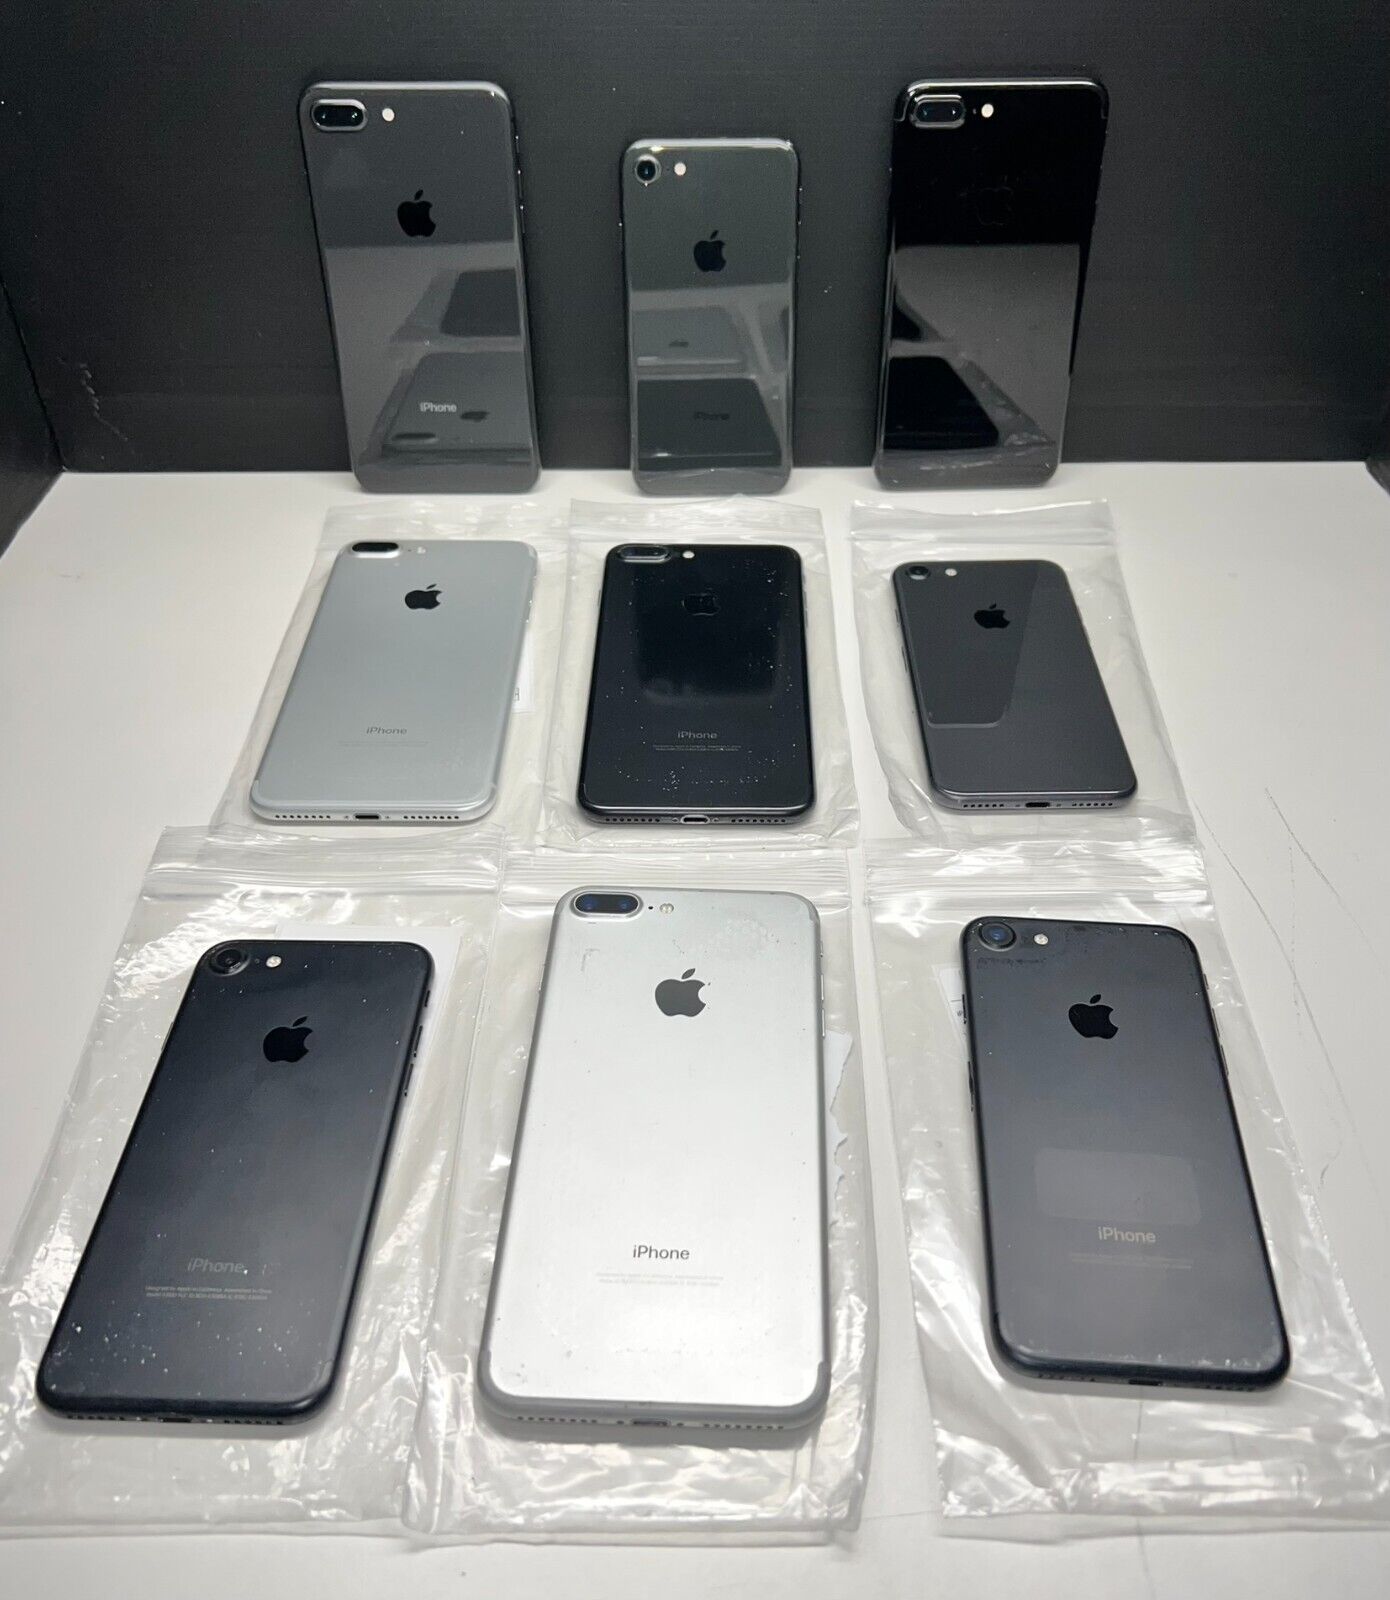 Lot of 44 iPhone 7 and 7 Plus Unlocked for Repairs (ID_2) Apple Apple iPhone 7 Plus